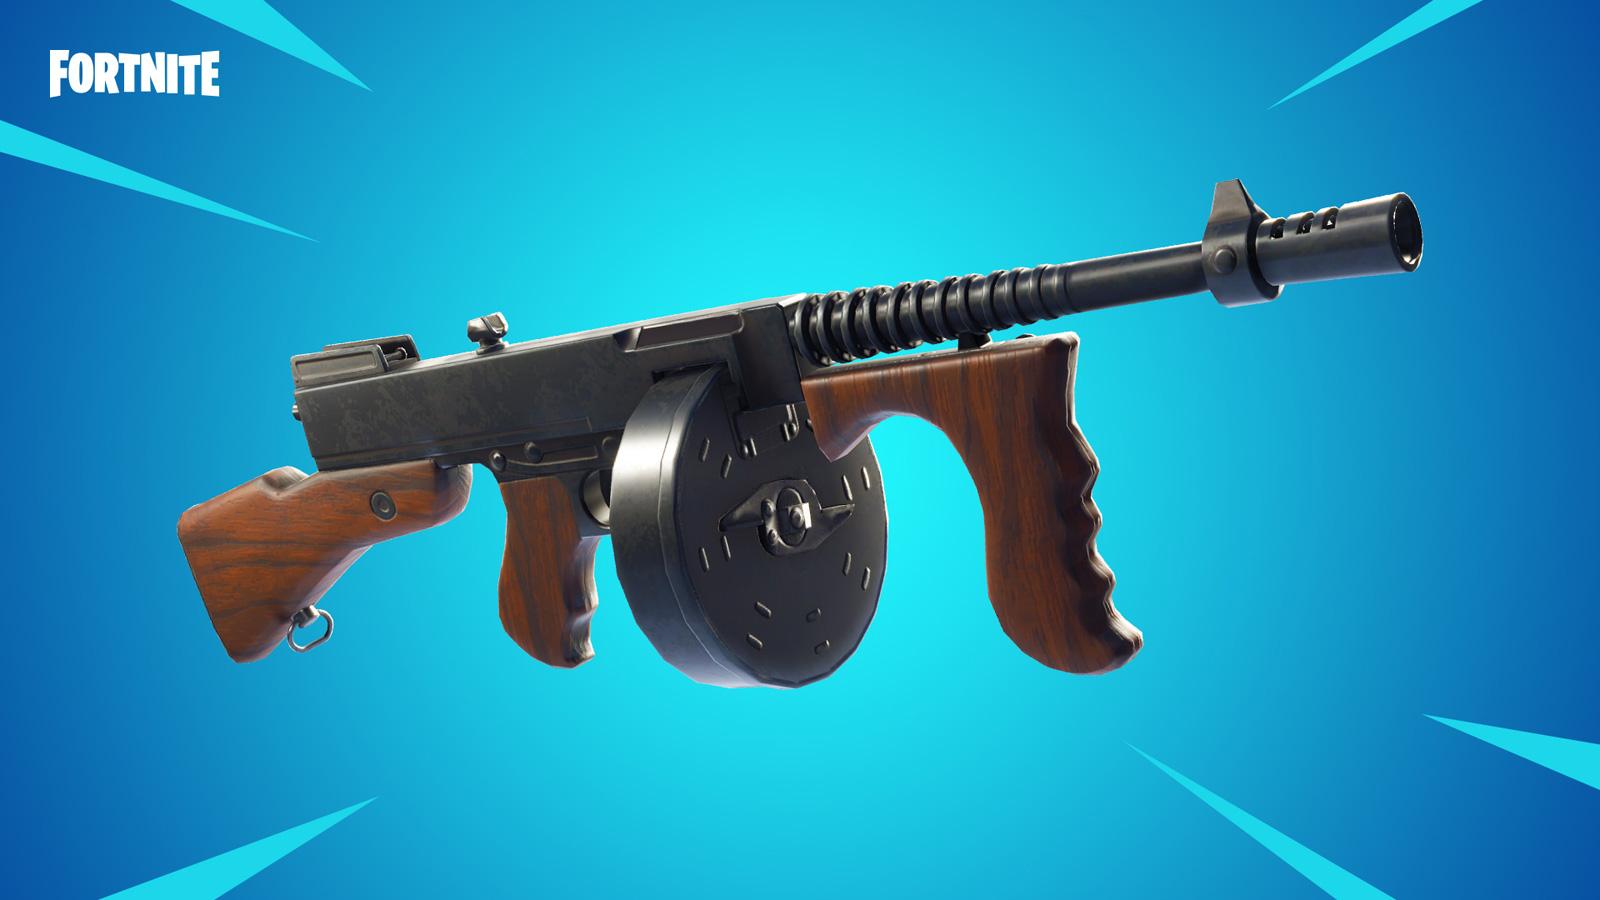 fortnite battle royale drum gun banned for being too powerful - fortnite uk ban